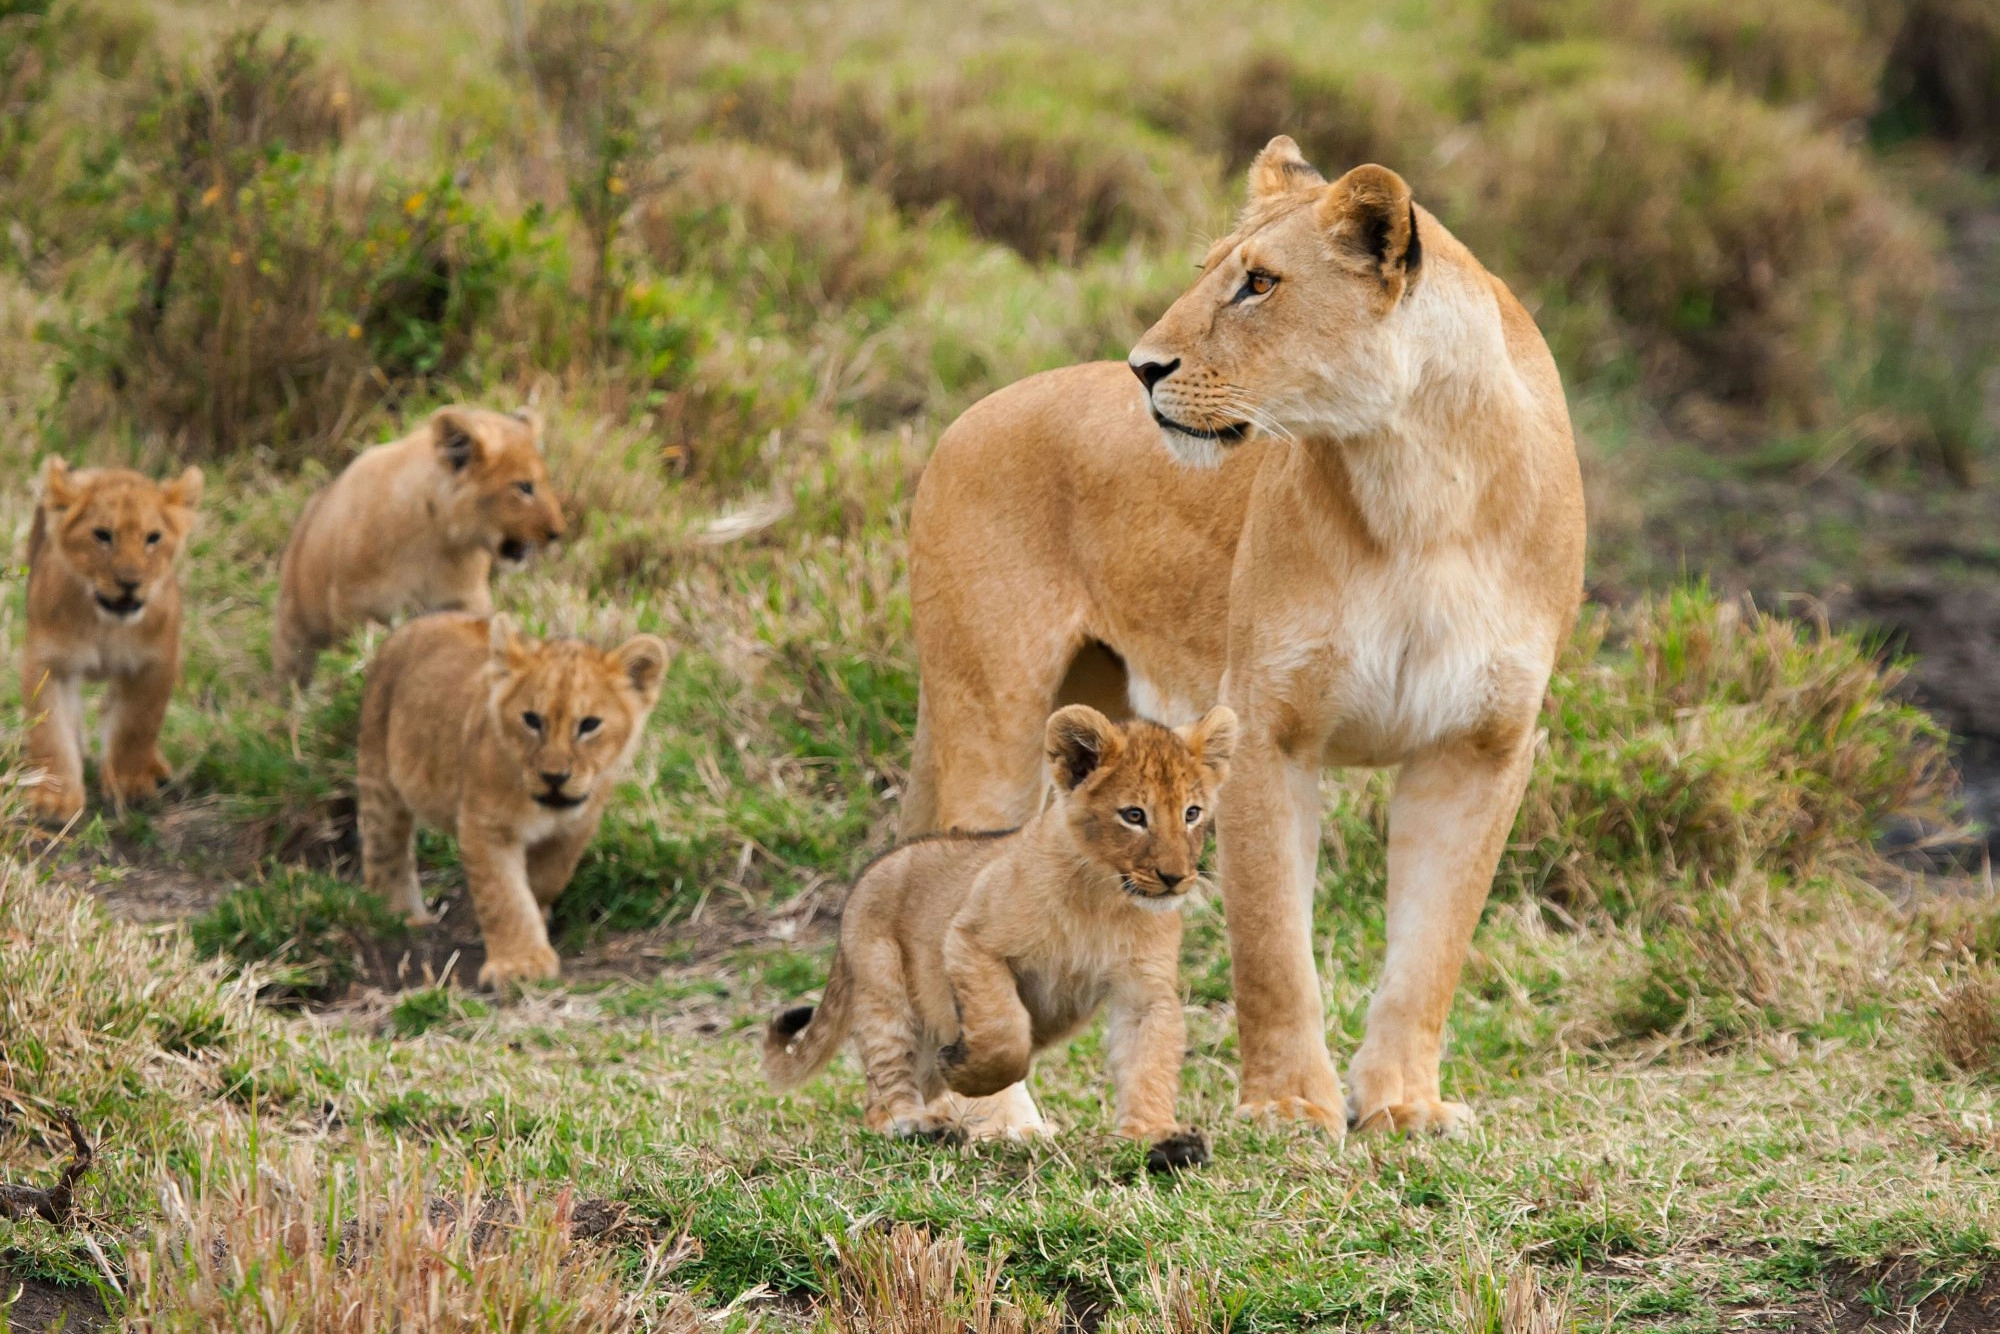 A lioness and her four young cubs in a national park in Kenya. World Animal Protection believes that wild animals should be left in the wild and not be used for entertainment. Credit Line: iStock. by Getty Images